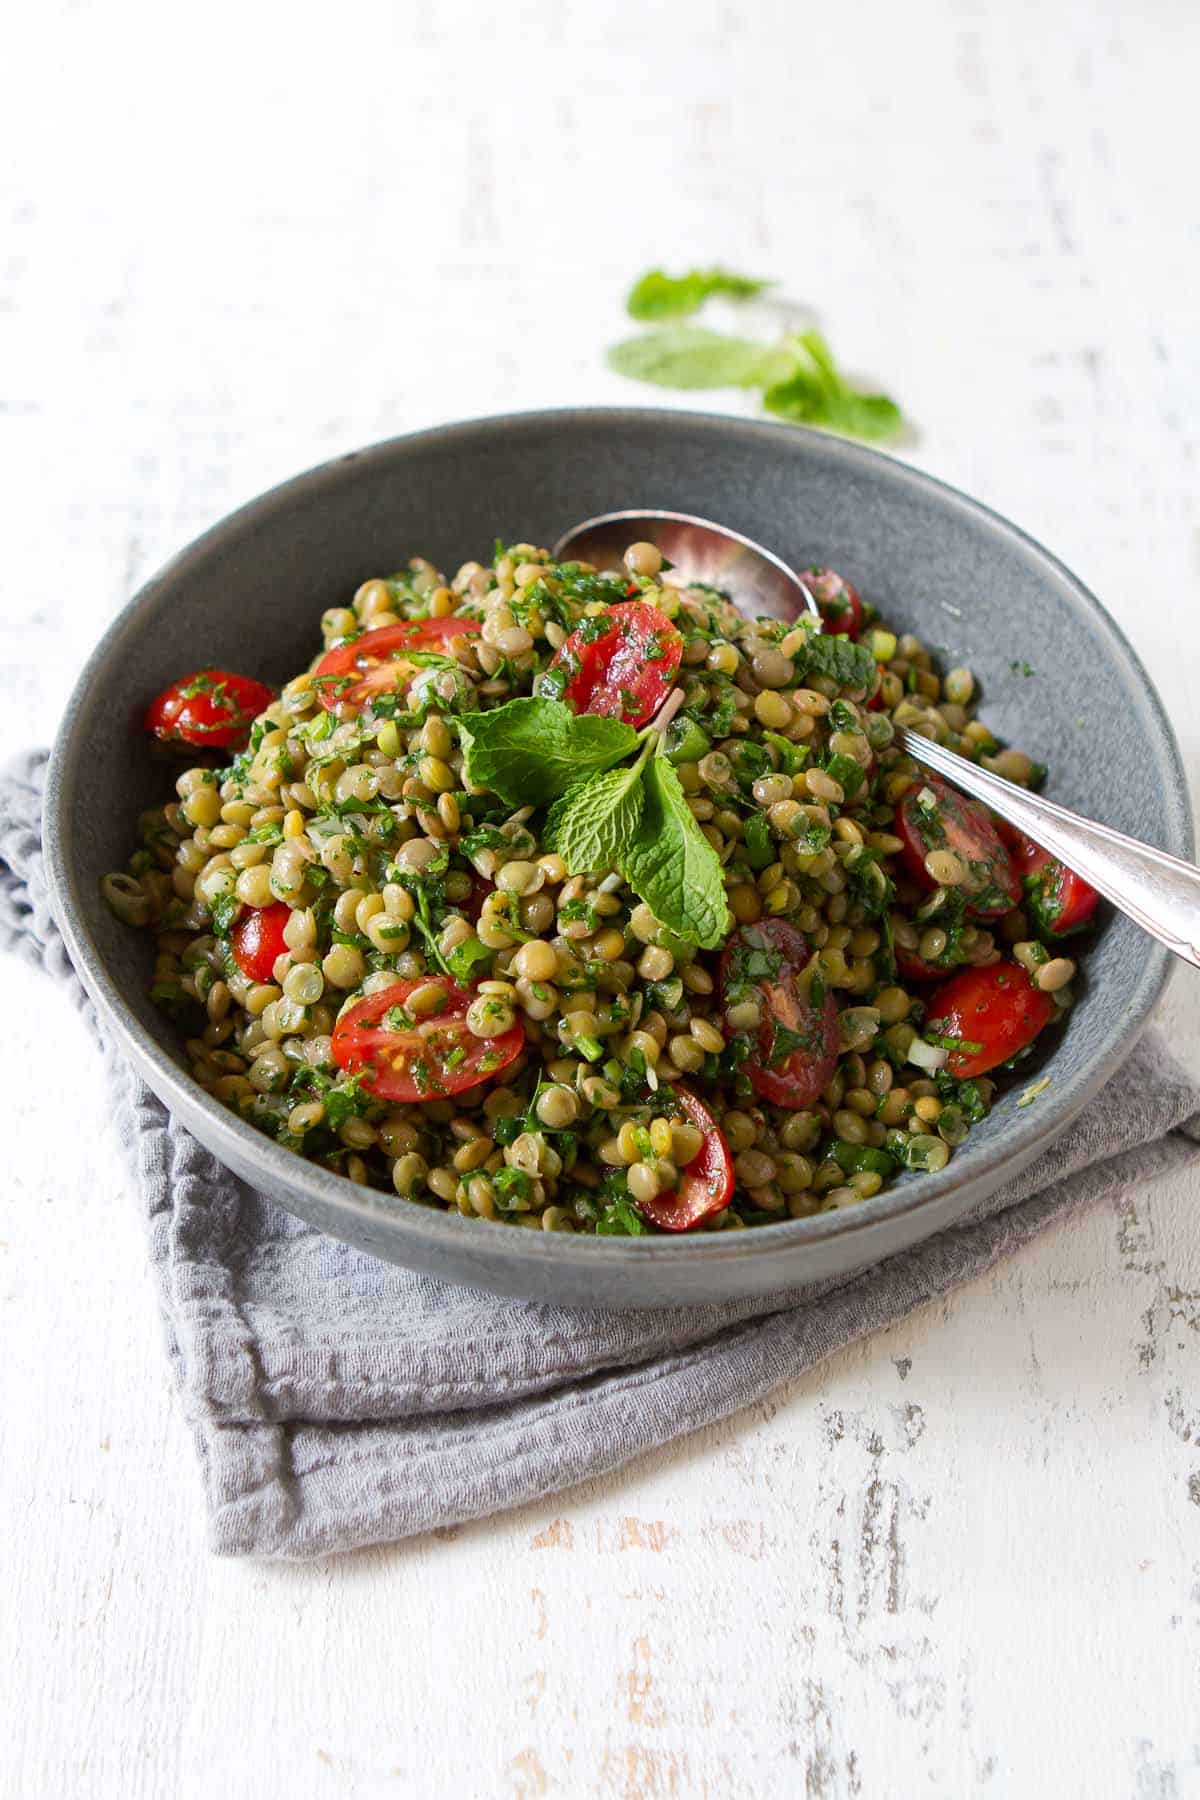 A gray bowl filled with a lentil salad with tomatoes.